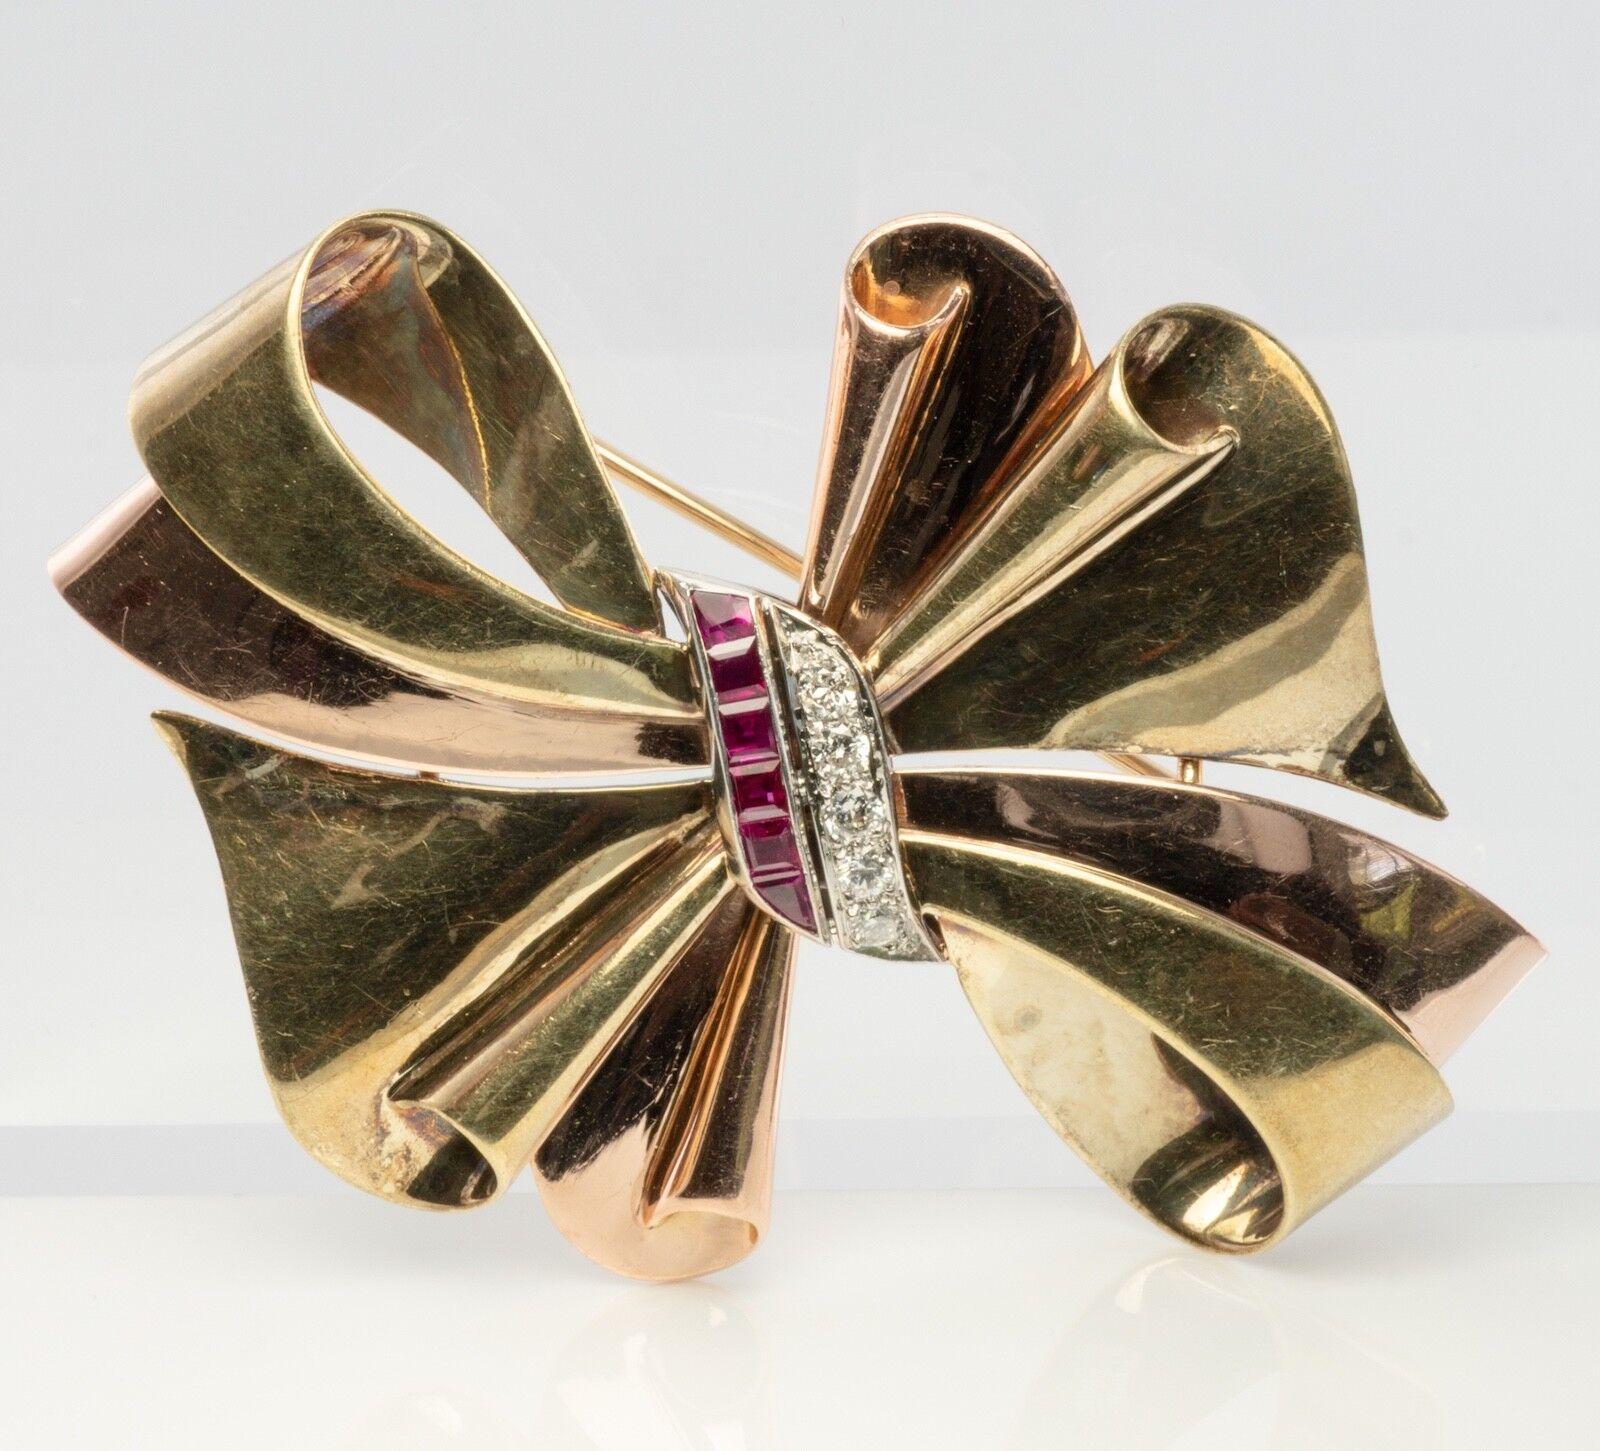 Vintage authentic Tiffany & Co diamond brooch, bow brooch, ruby brooch, ribbon brooch. This gold brooch is finely crafted in combination on of 14K Yellow and Green Gold. Six natural Earth mined Rubies measure about 2mm. They are very clean and